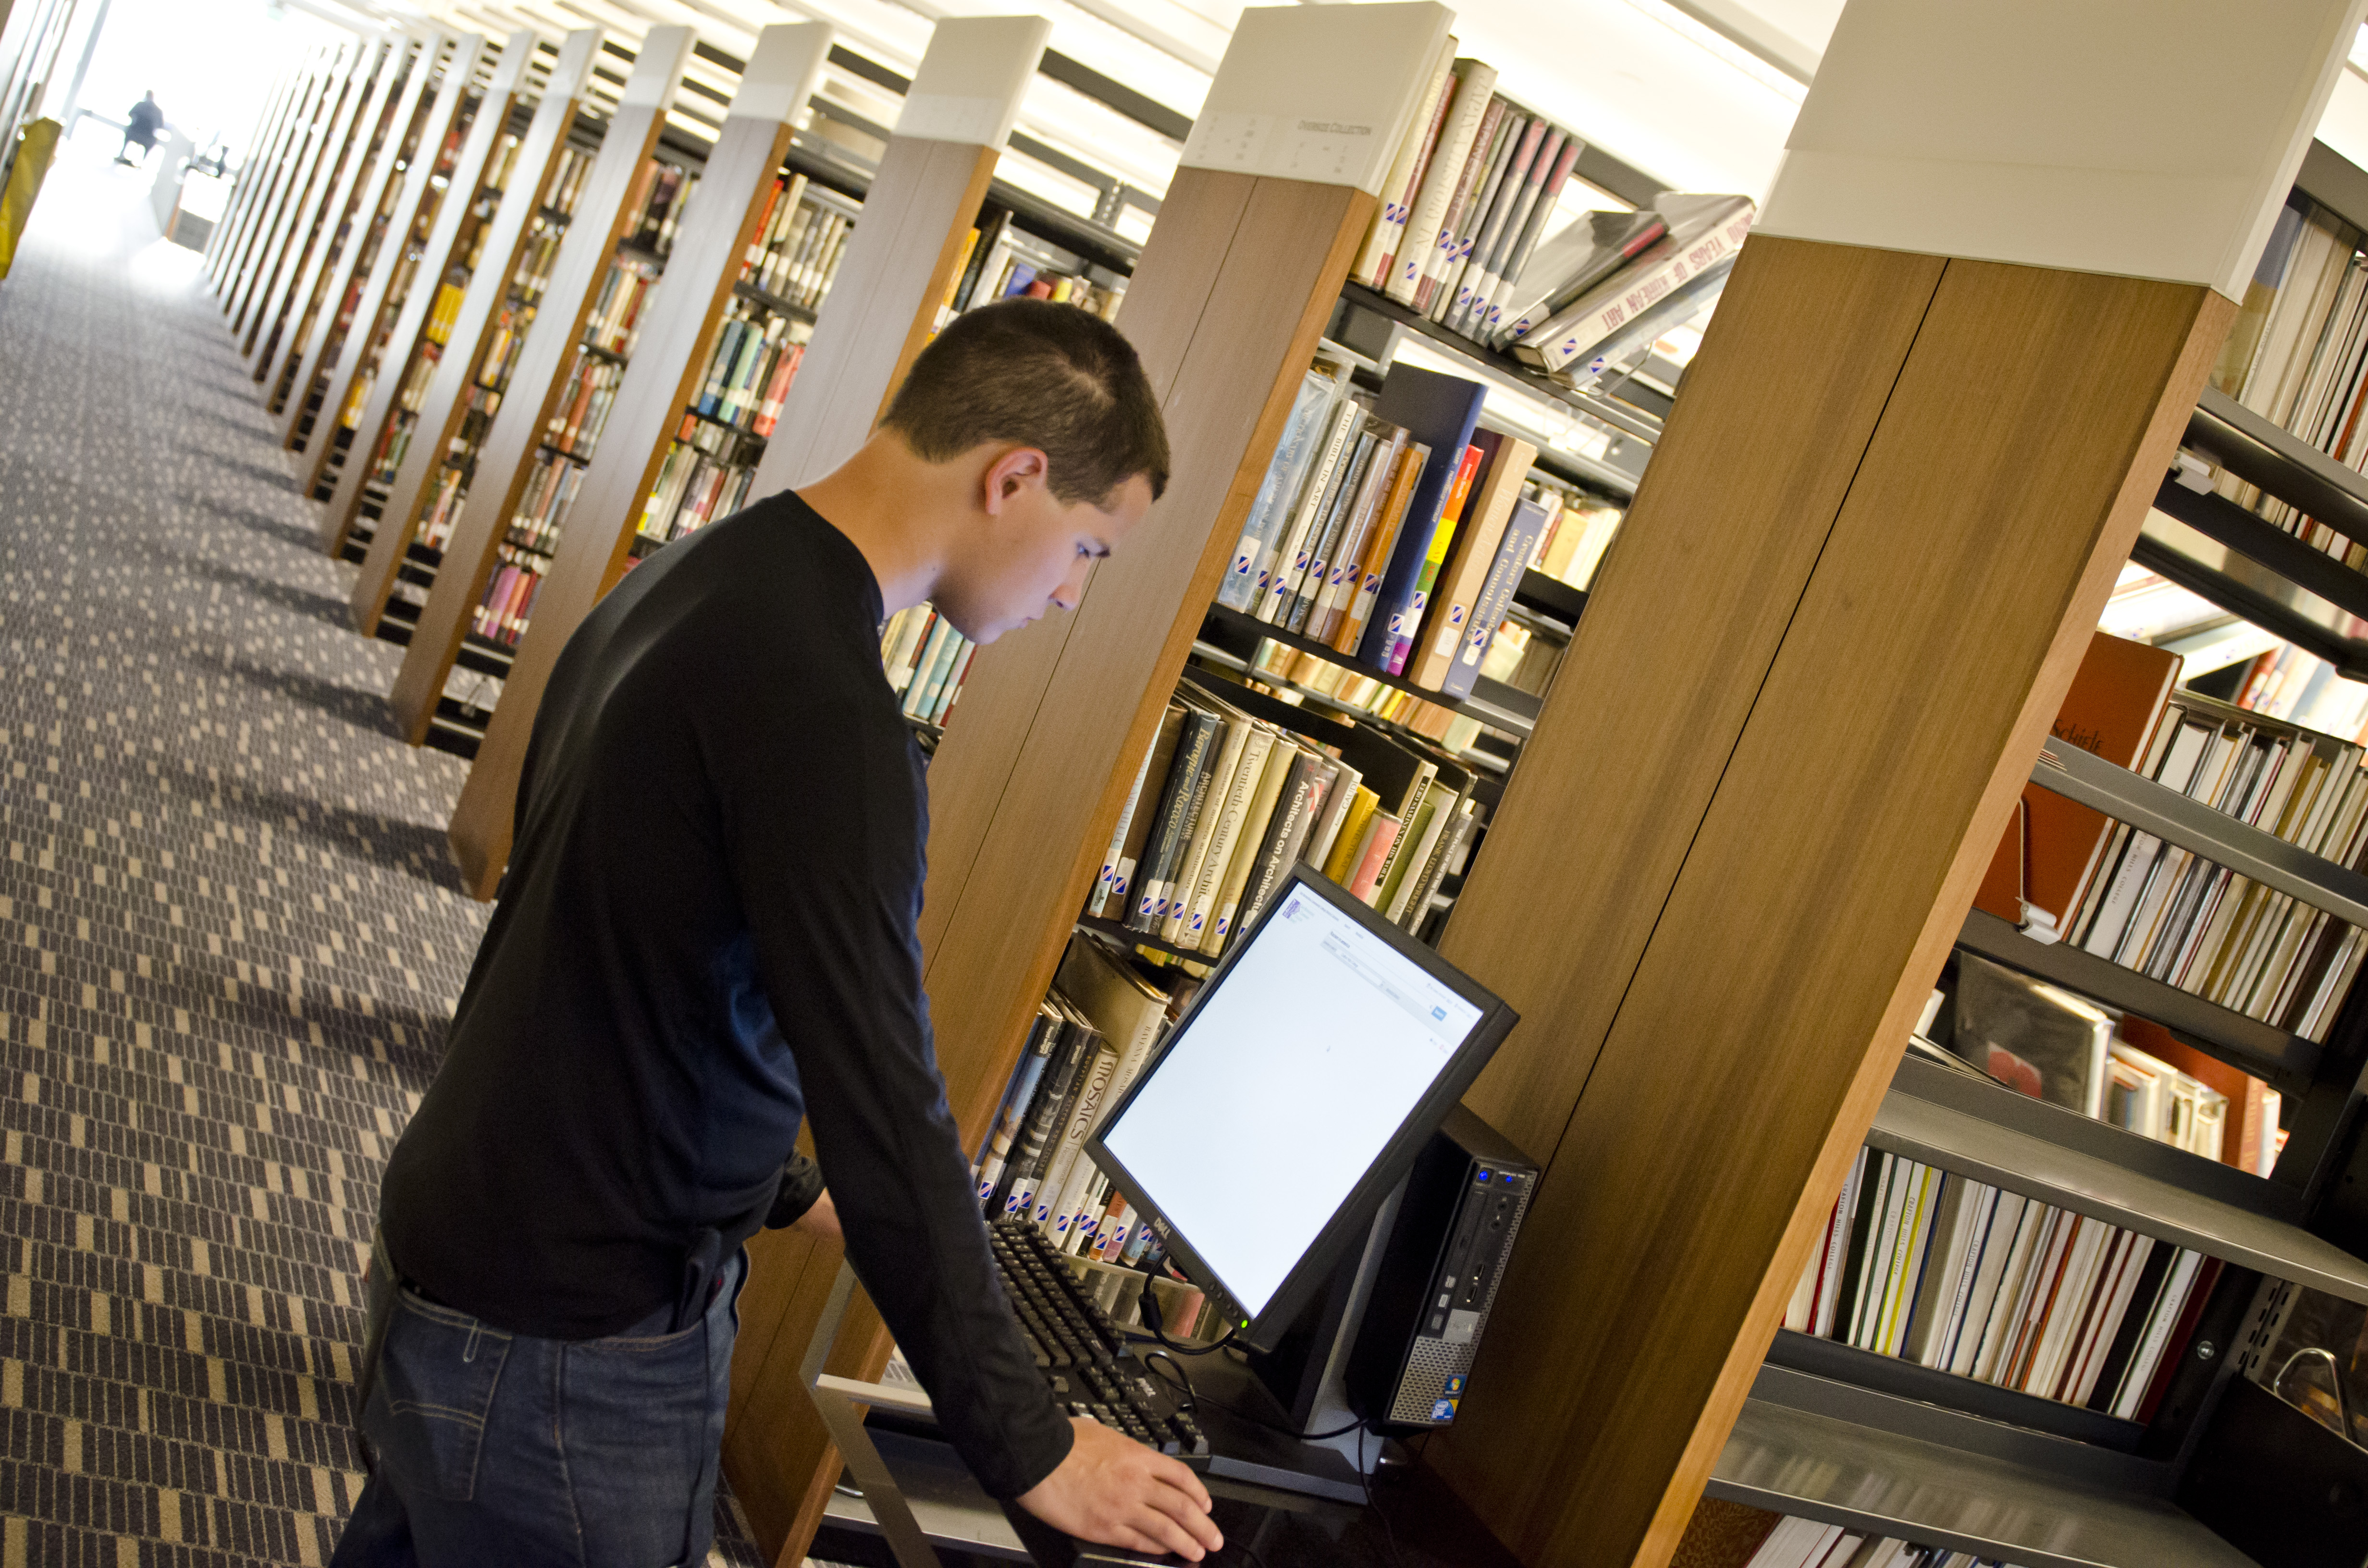 A student using a computer in the library.